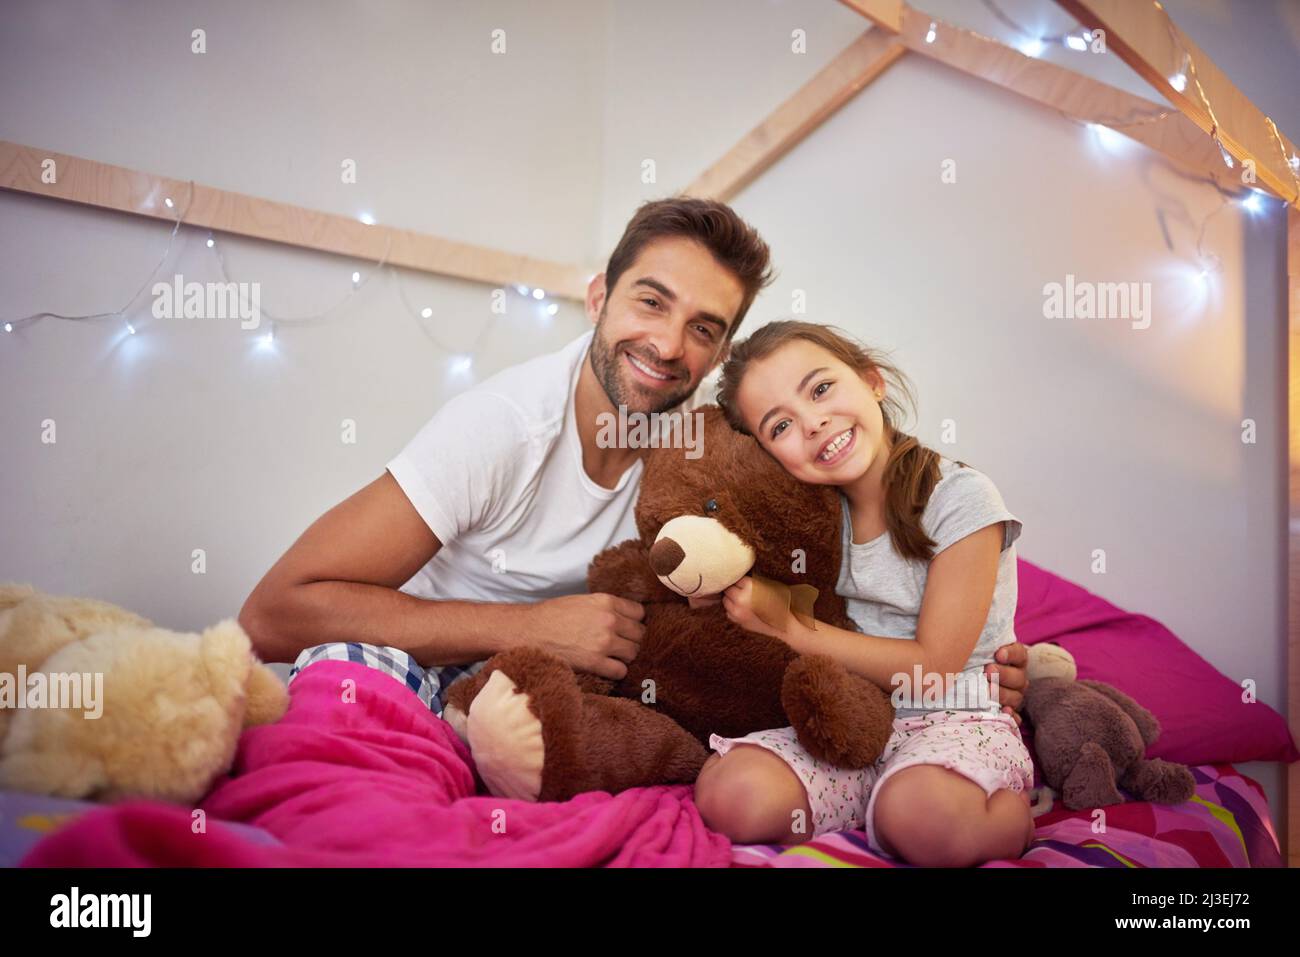 Dad always makes time to treasure with his little girl. Portrait of a father and his little daughter bonding together at home. Stock Photo